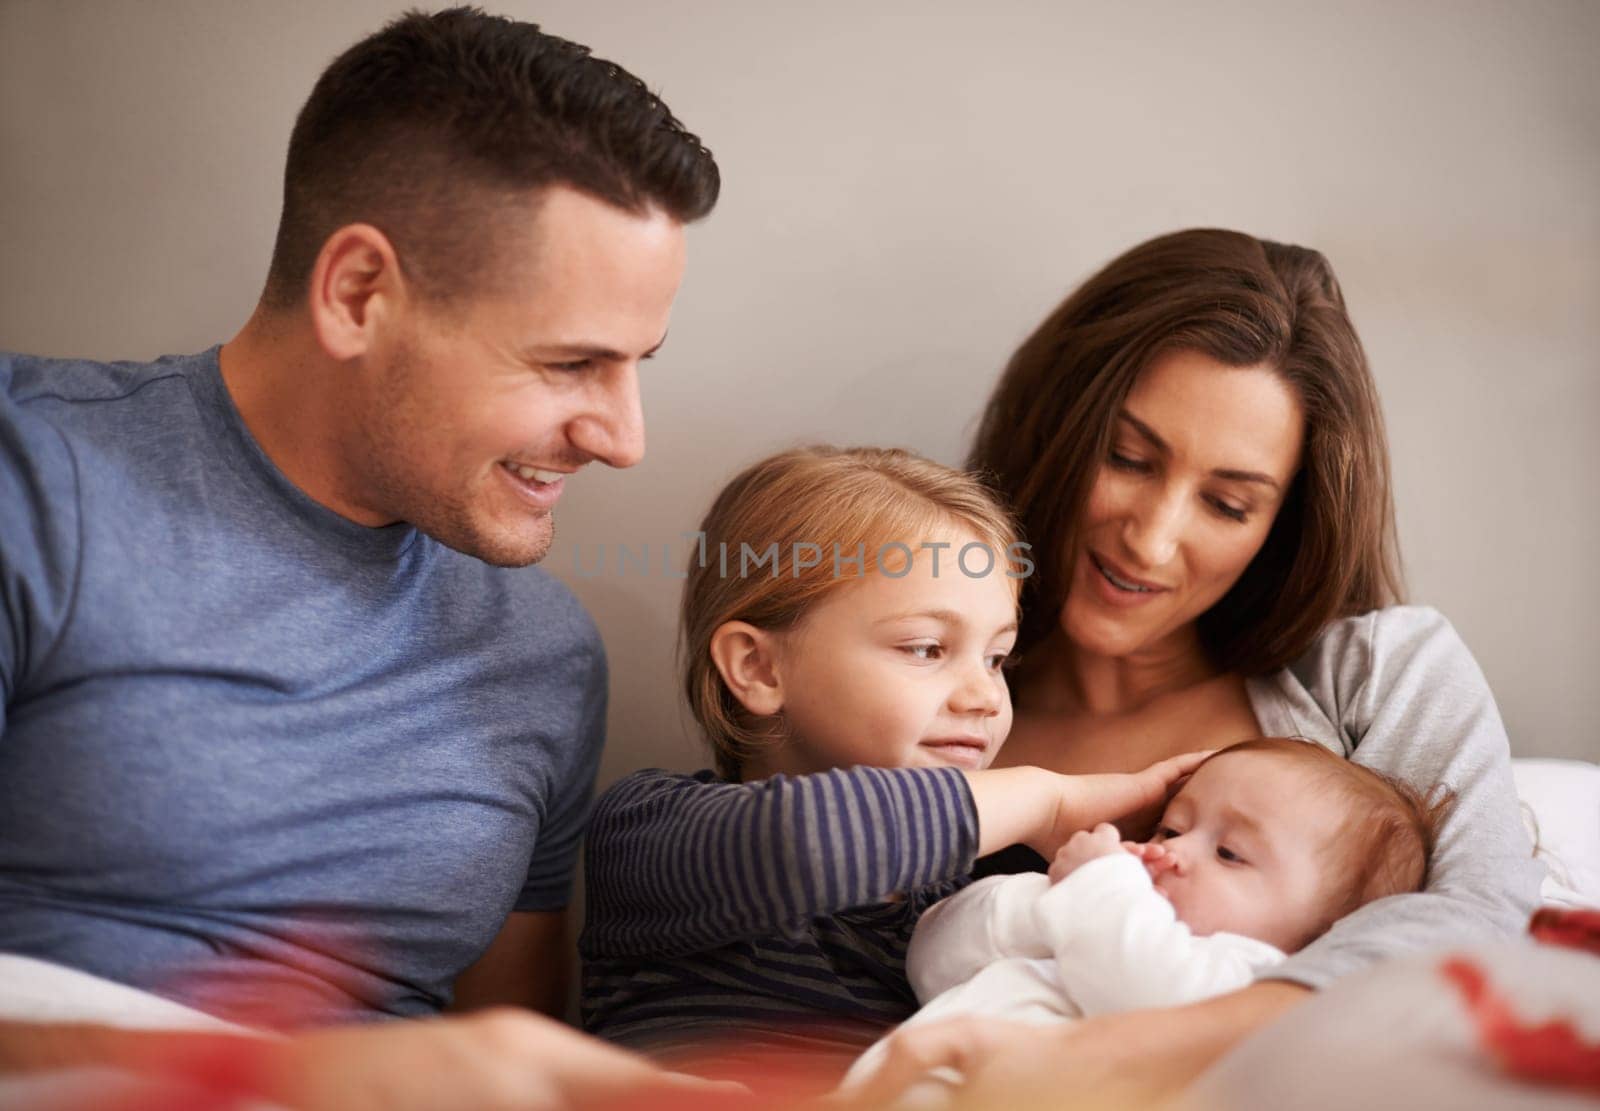 Home, family and parents with baby, kids and bonding together with happiness and care in the morning. Bedroom, mother and father with children and holding infant with comfort, smile and weekend break.